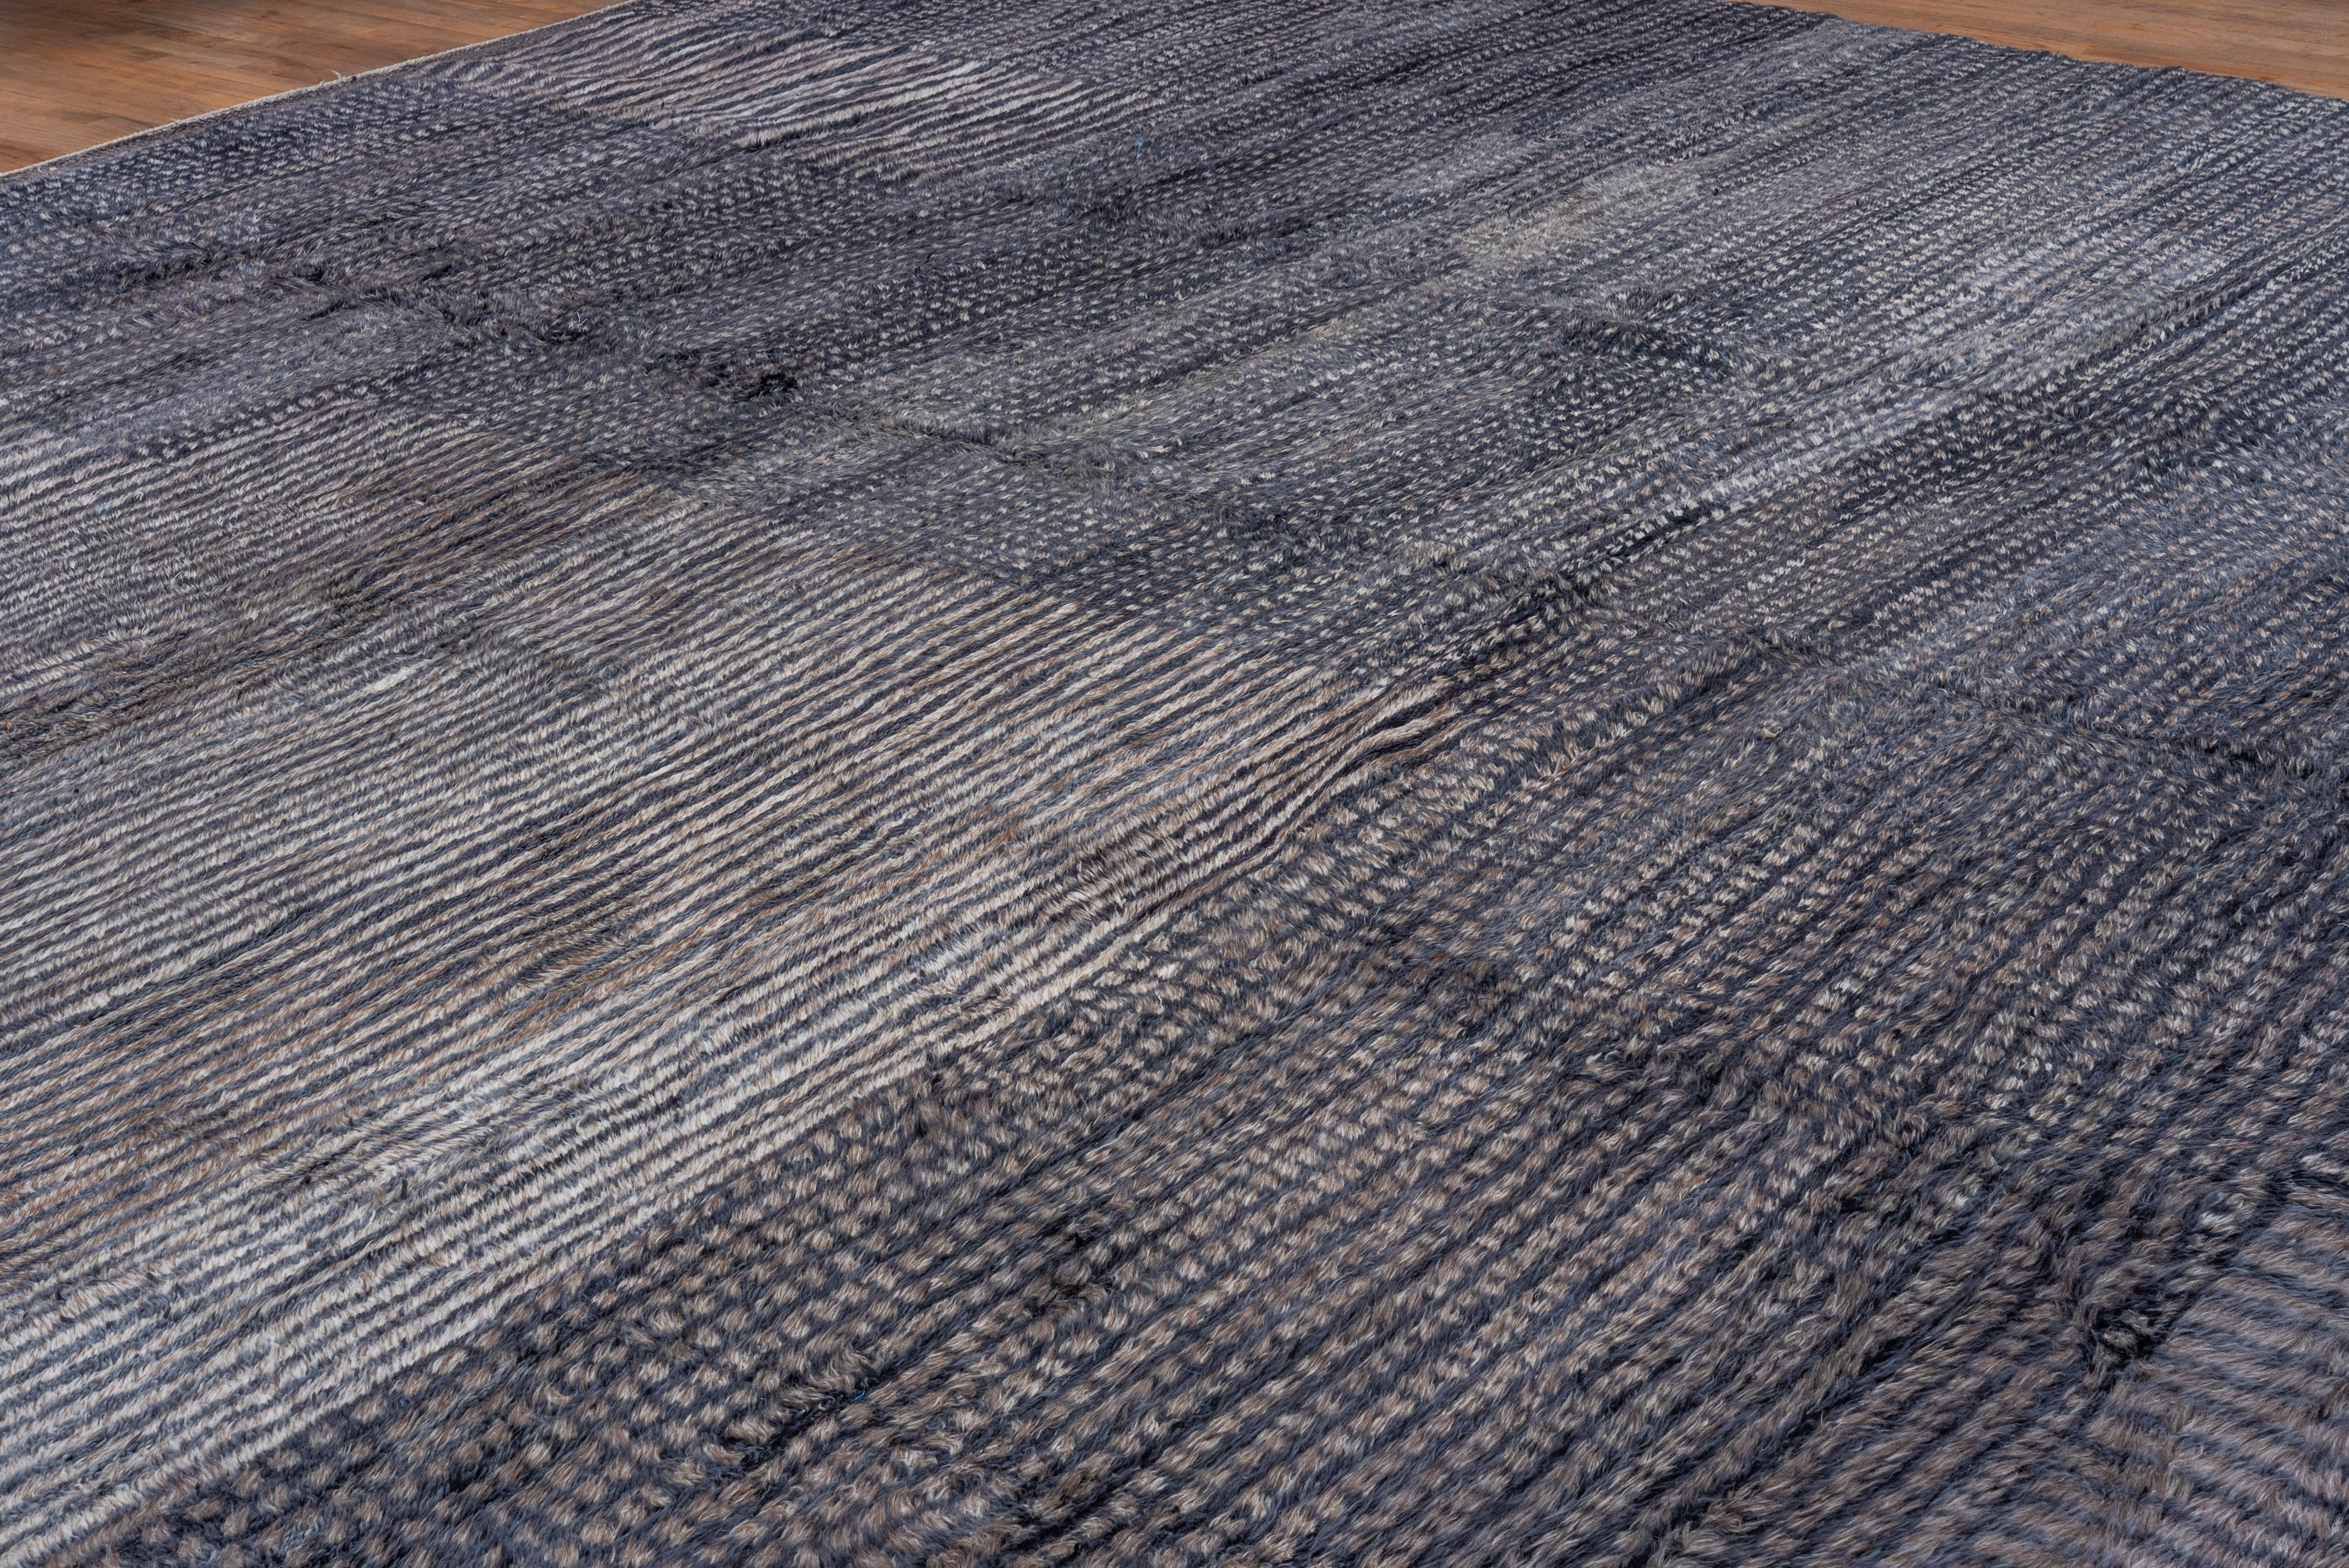 This long pile rustic carpet shows panels of lines running vertically and horizontally, and other sections with dense arrays of small dots, in light gray, dark gray and navy tones, borderless. Excellent brand new condition.